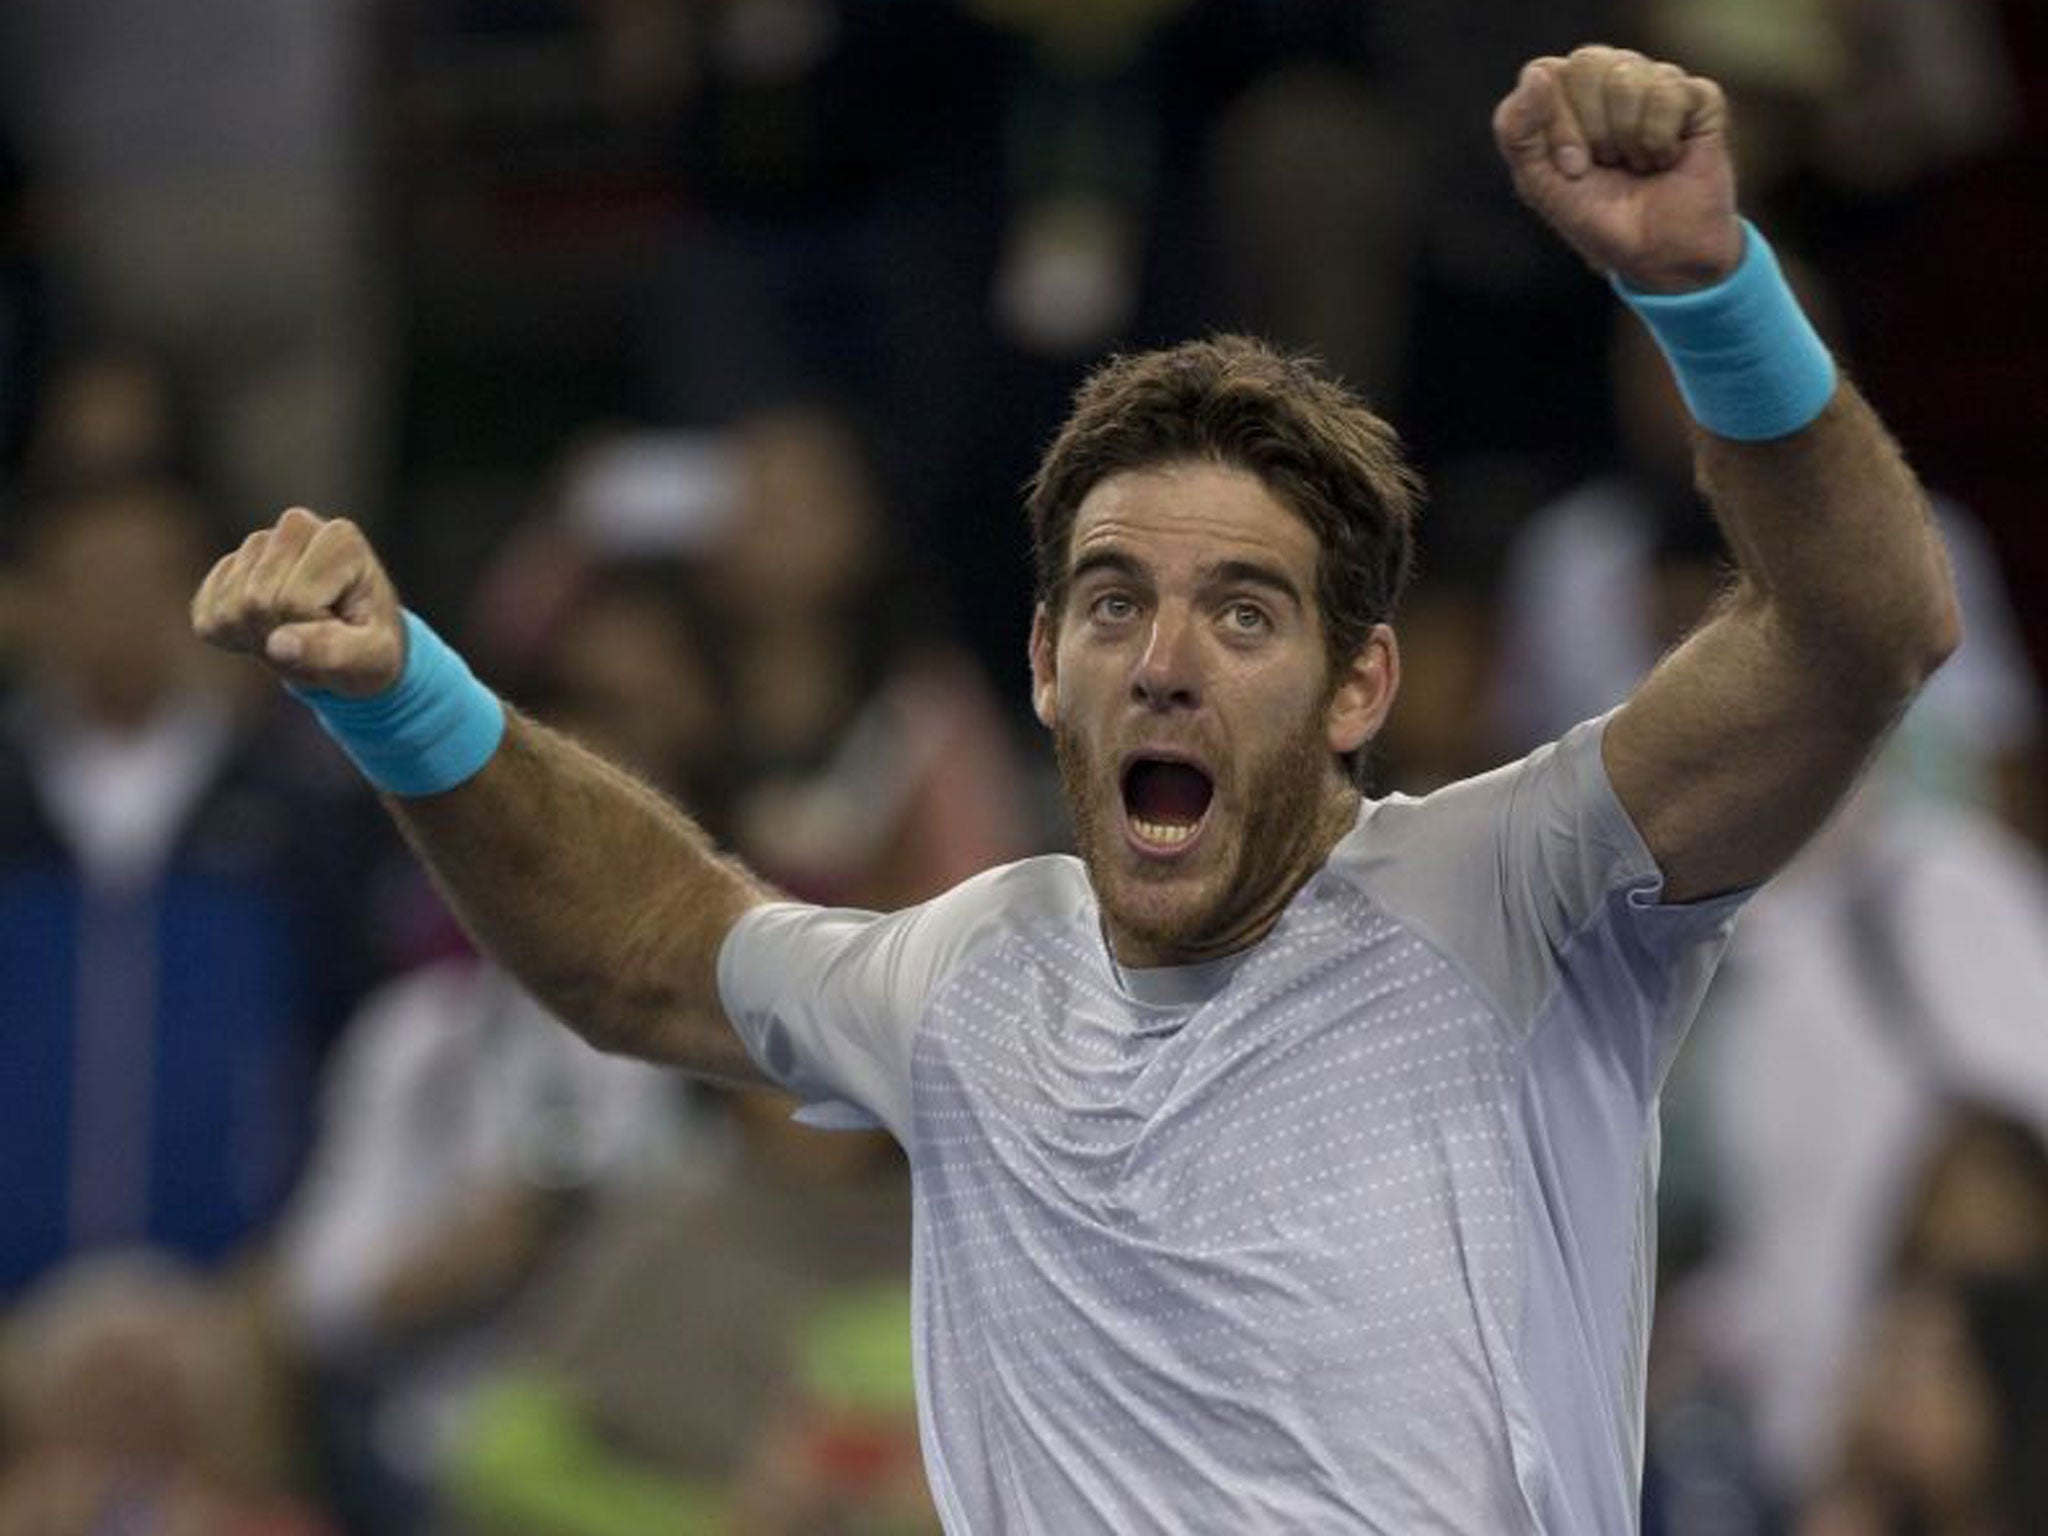 Jumping for joy: Juan Martin del Potro savours his thumping 6-2, 6-4 victory